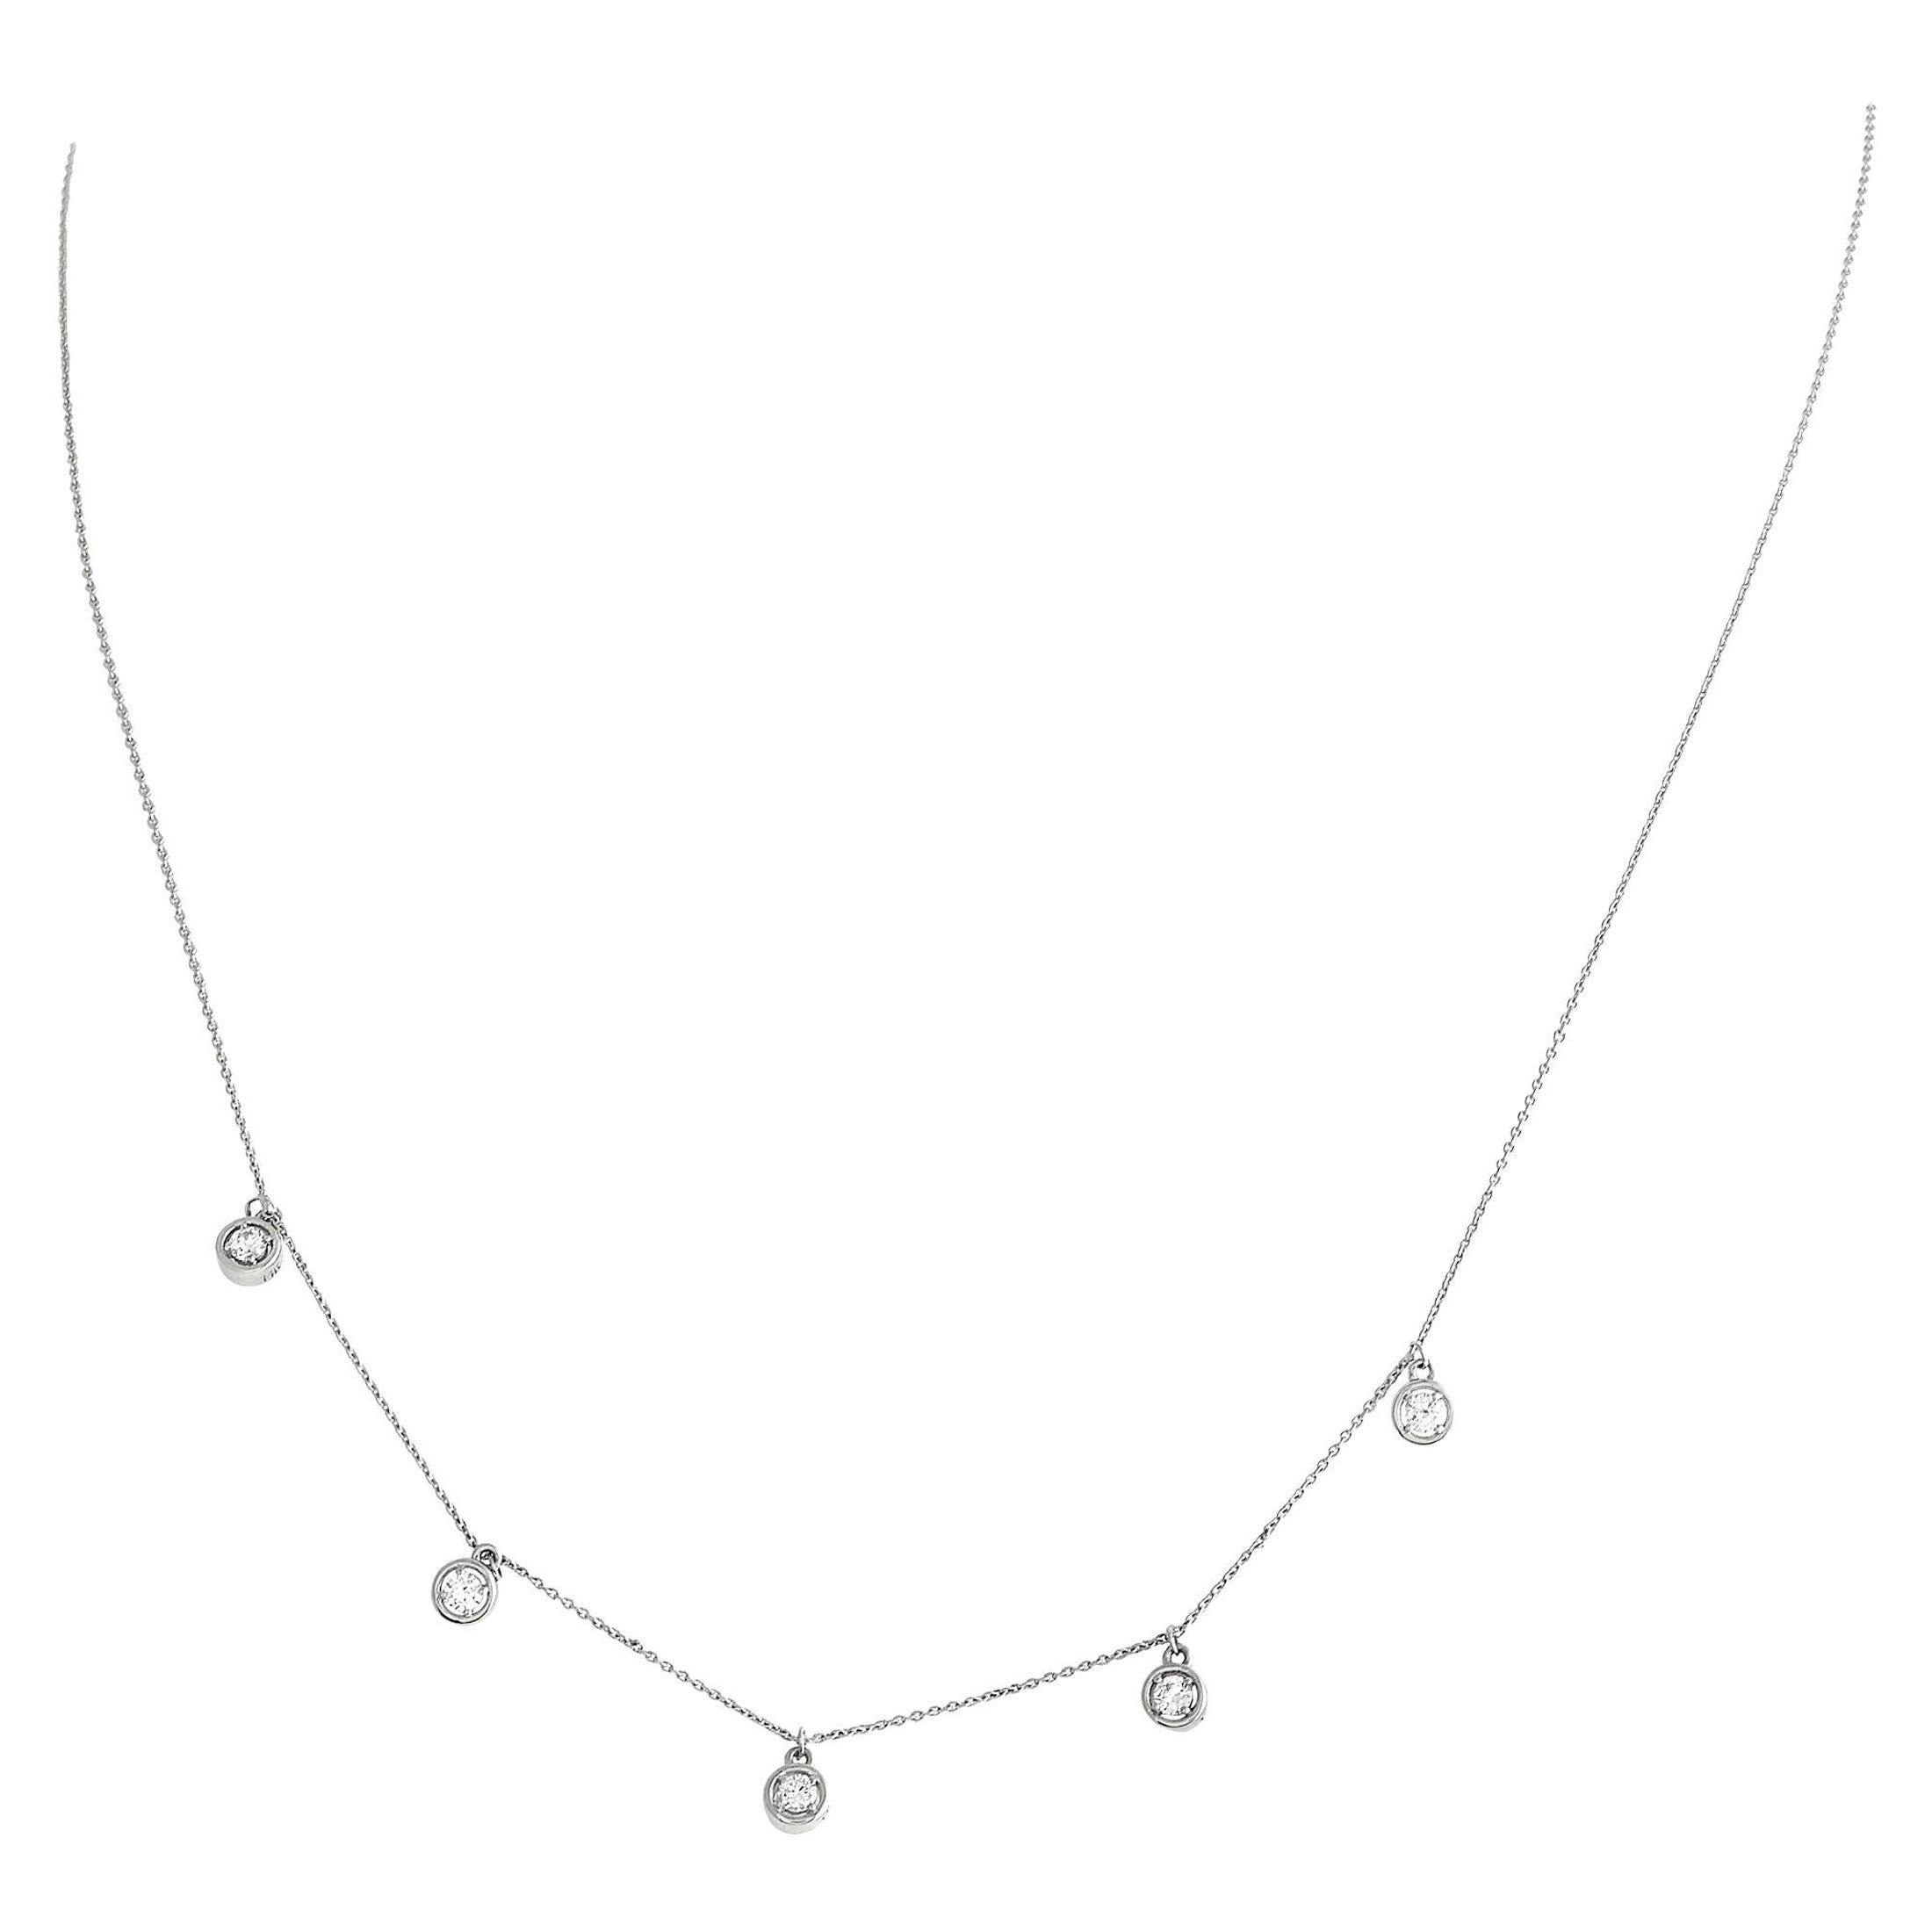 14K White Gold 0.25ct Diamond Station Necklace NK01459-W For Sale